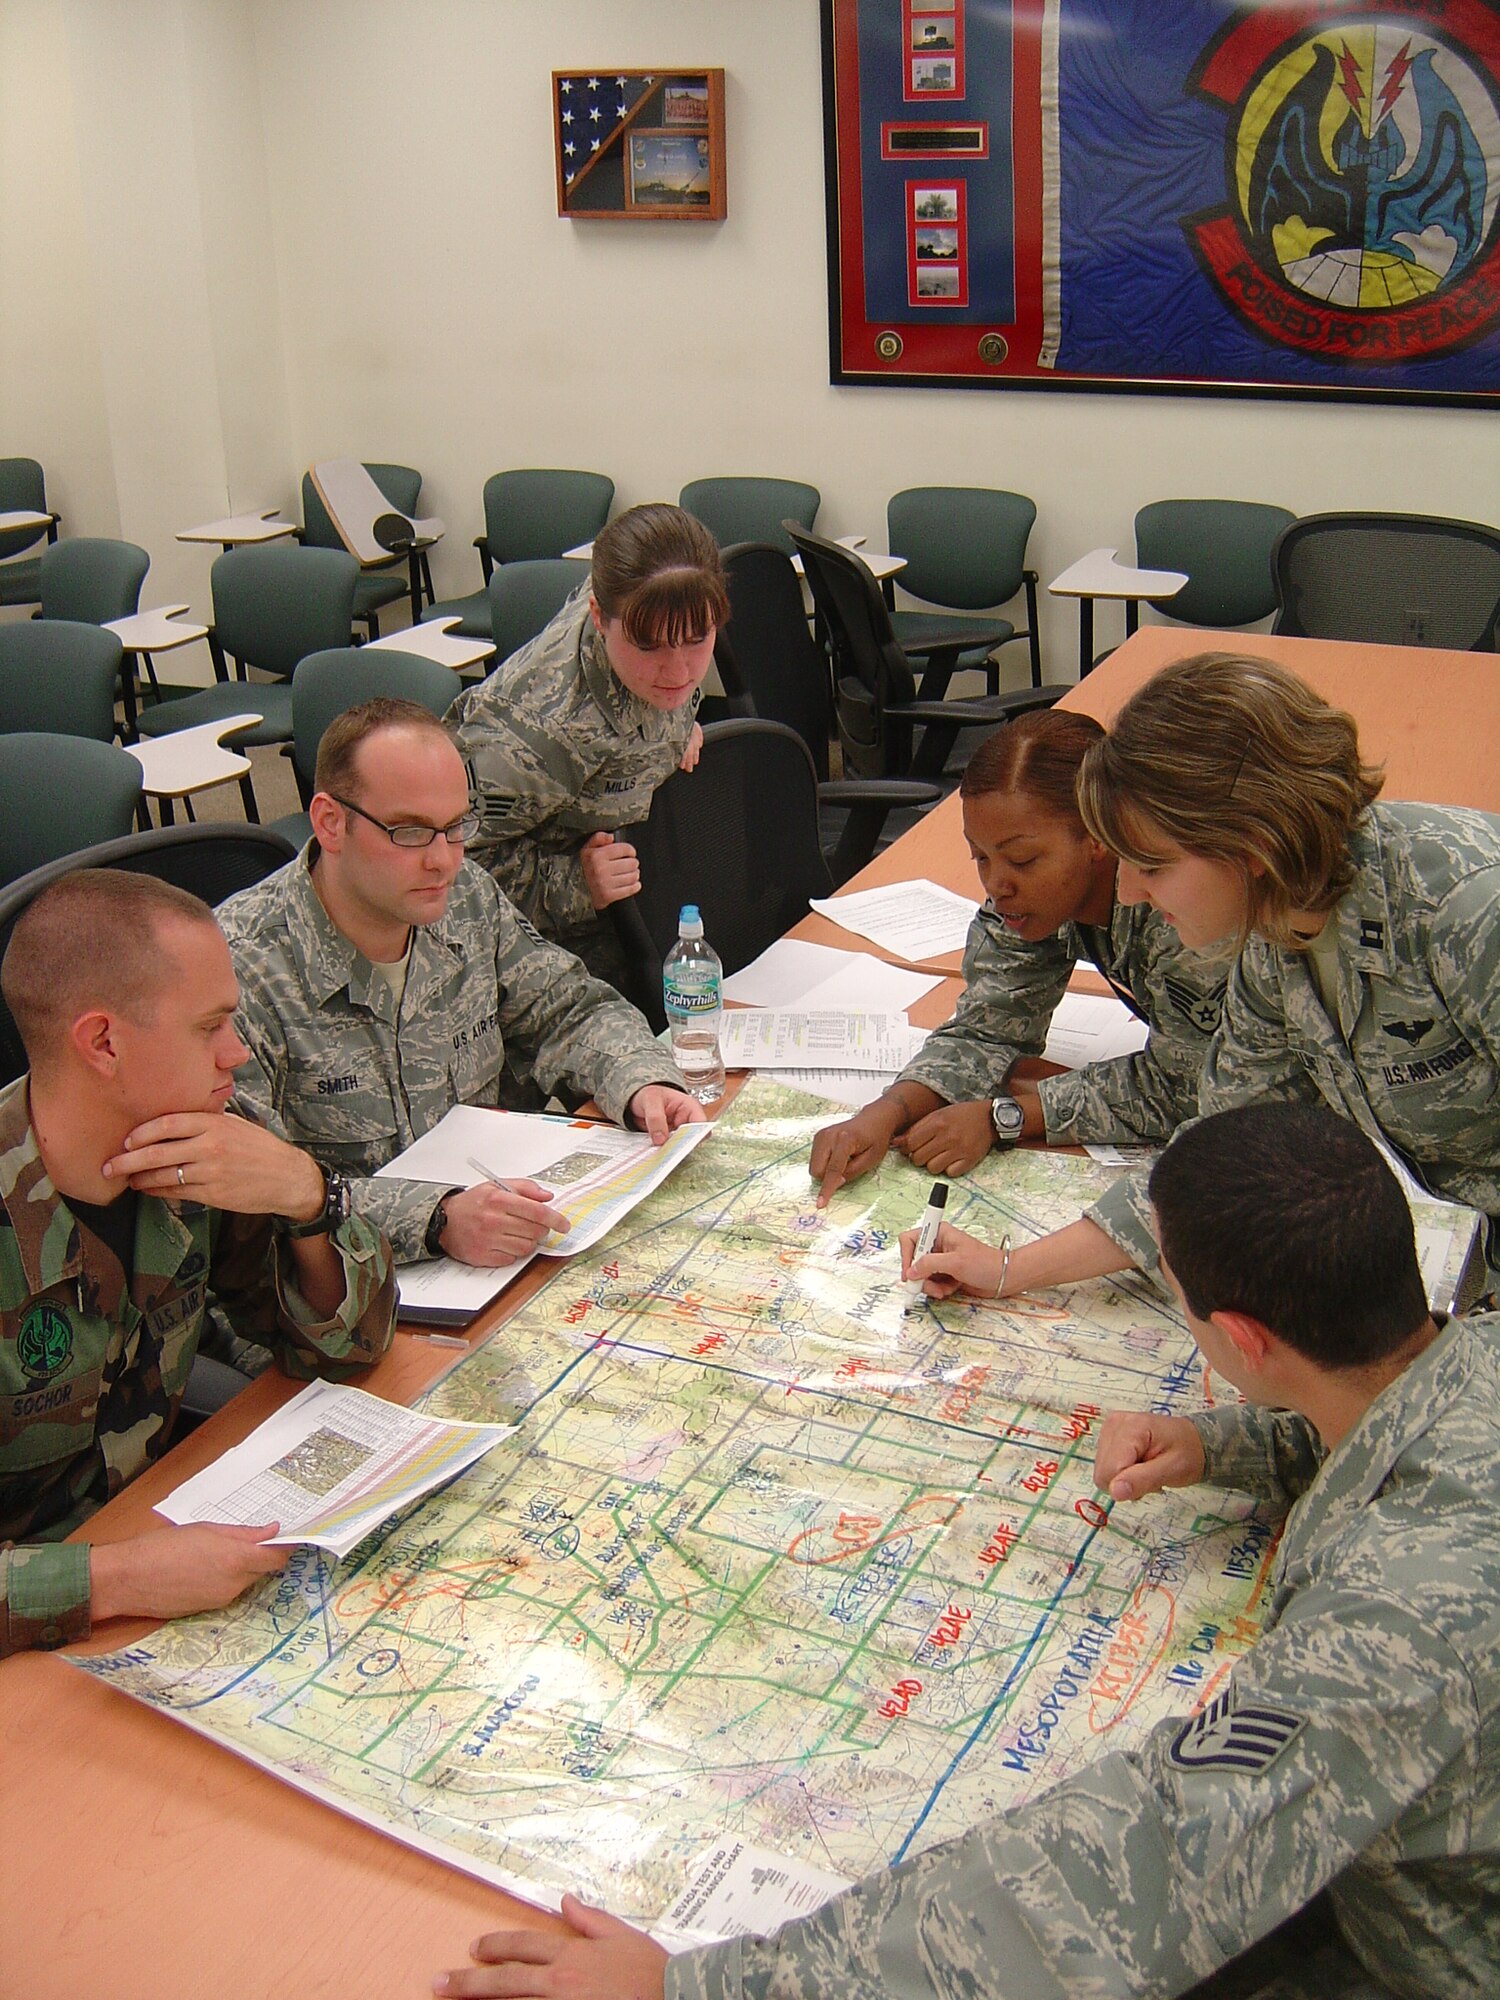 The 728th Air Control Squadron selected Turkey Shoot competition team review a map of the Nevada Test and Training Range, where the simulated war took place during a March exercise. From left to right are Airman 1st Class Robert Sochor, Staff Sgt. Andrew Smith, Senior Airman Lisa Mills, Staff Sgt. LaToya Johnson, Capt. Kisha Balling and Staff Sgt. Anthony Rigazio.